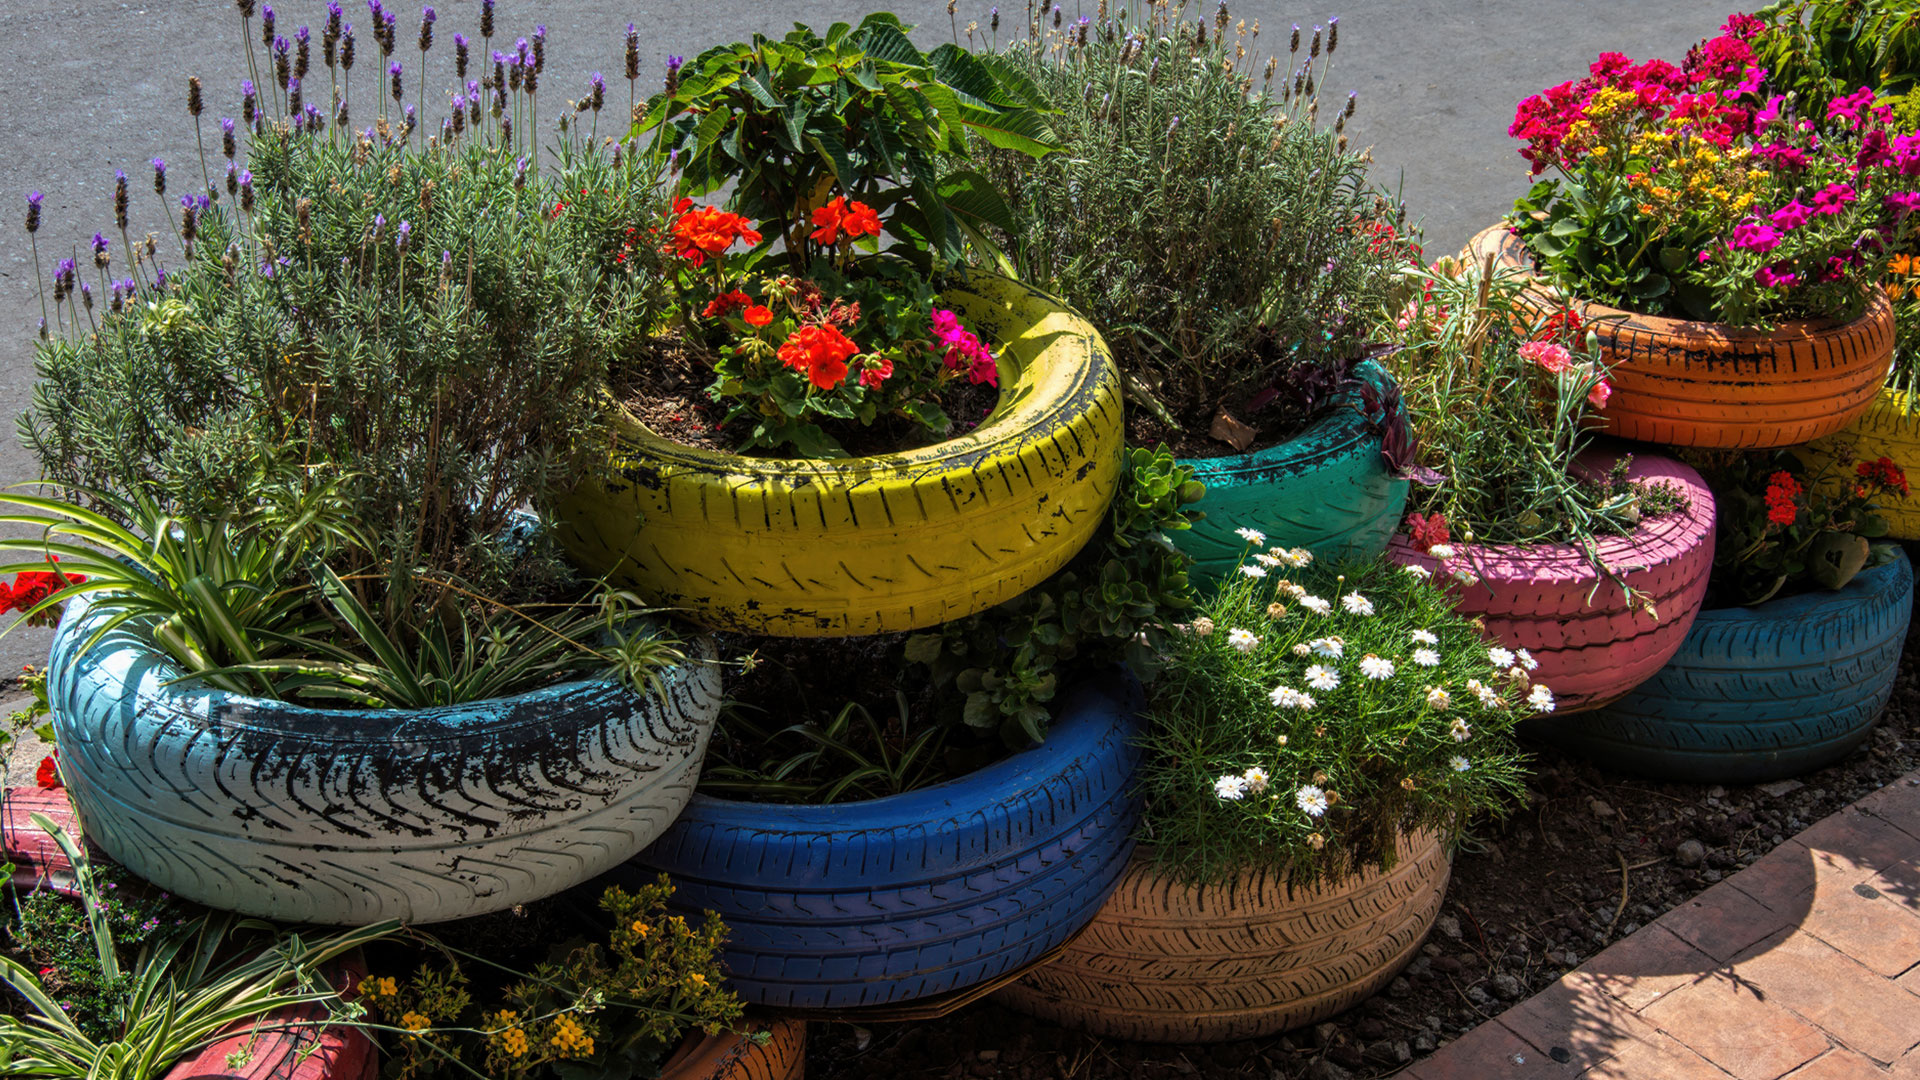 Colourful recycled car tyre turned into planter pots